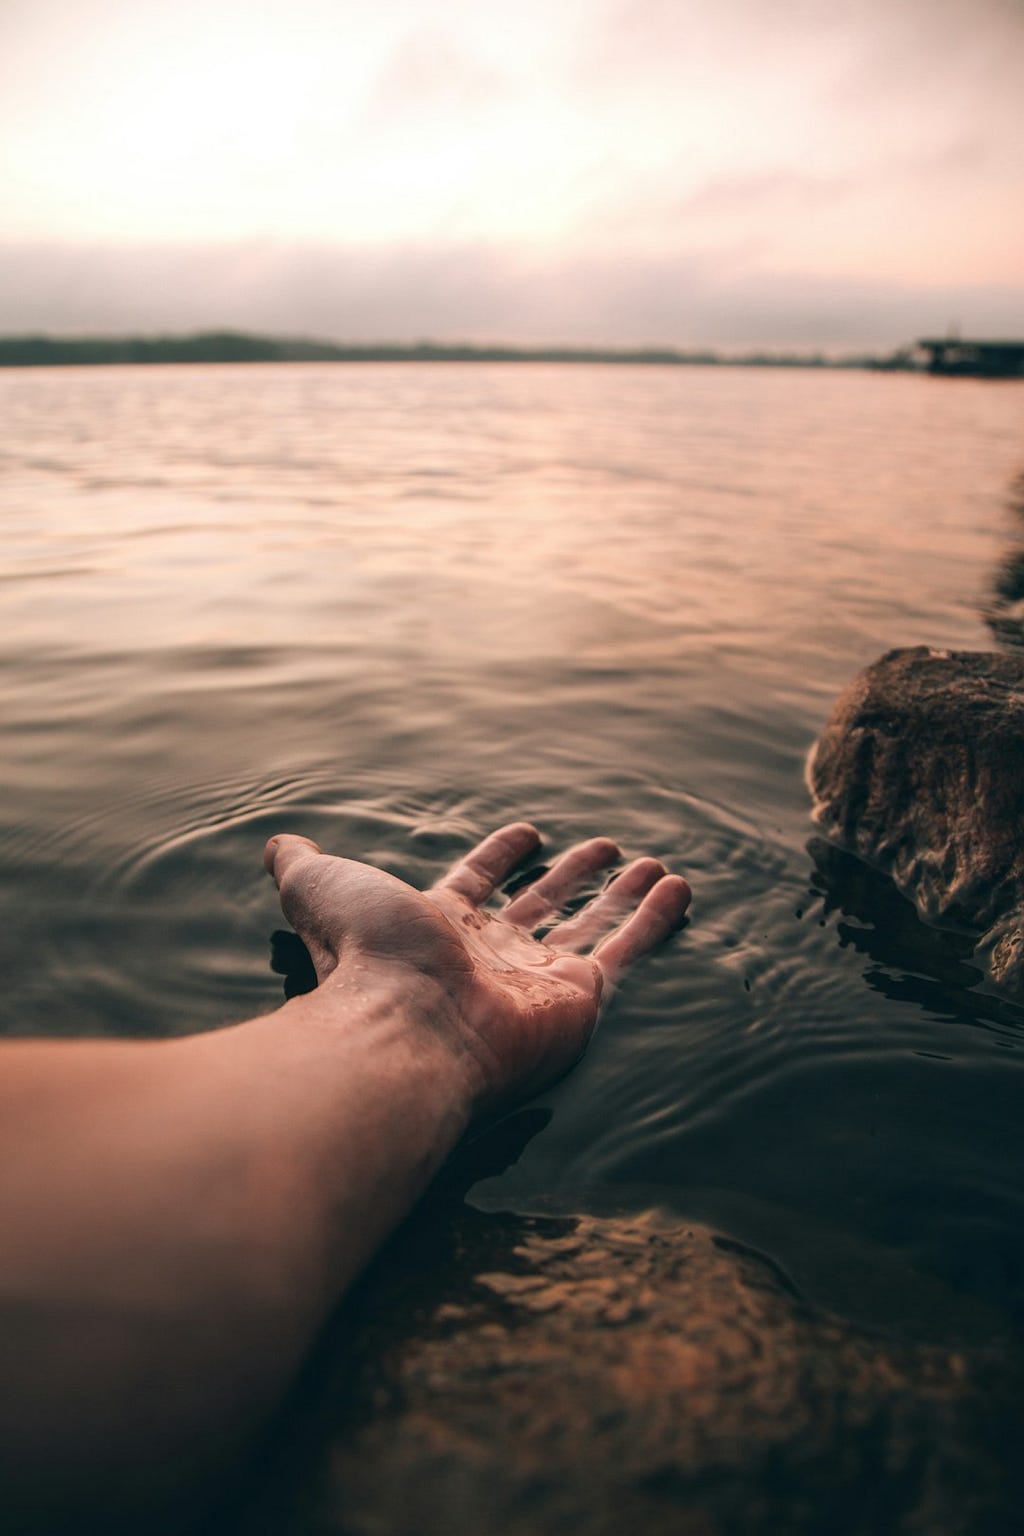 A person submerging their hand in water.